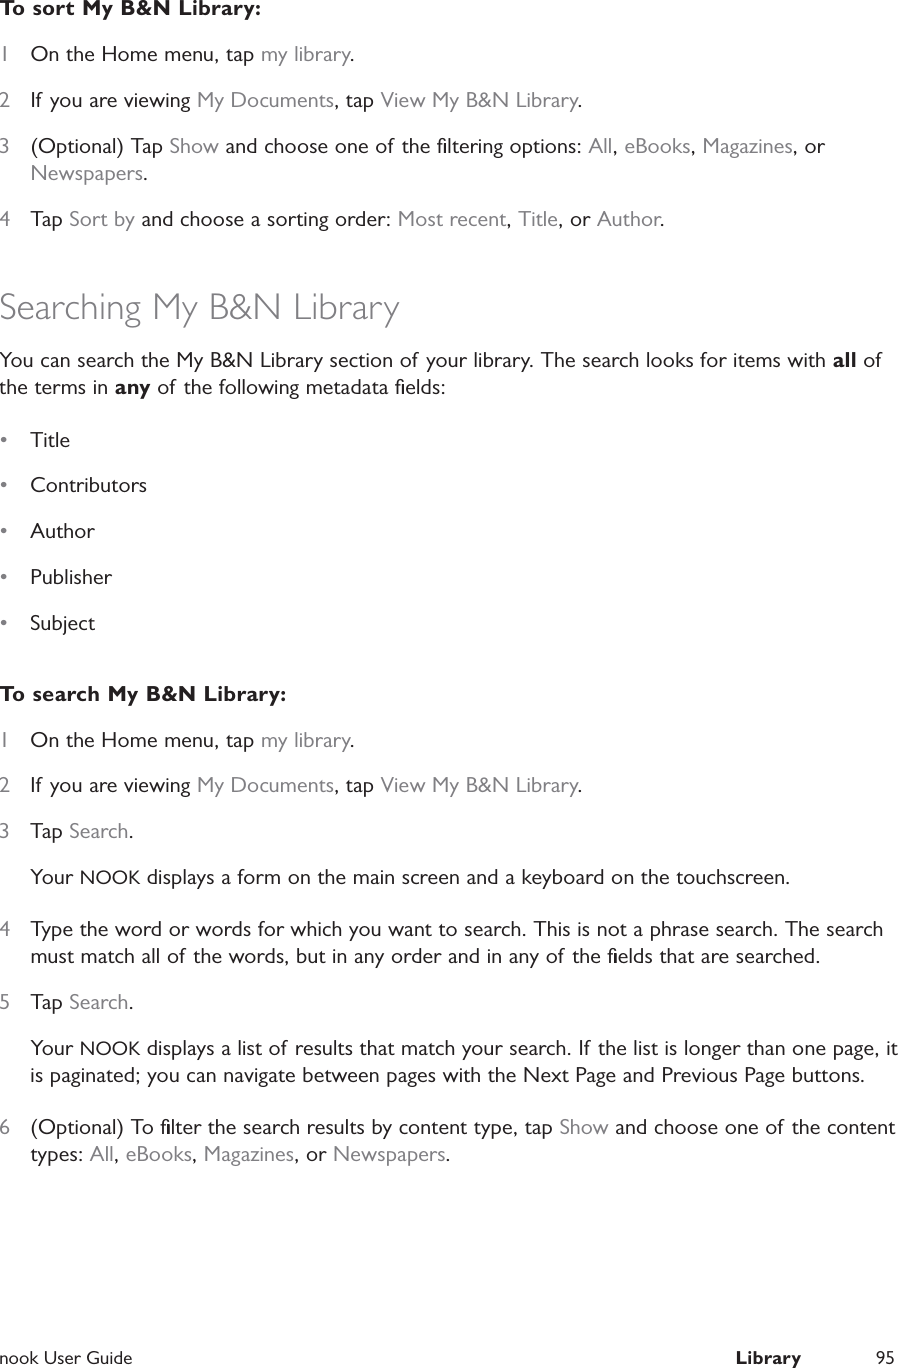  nook User Guide  Library 95To sort My B&amp;N Library:1  On the Home menu, tap my library.2  If you are viewing My Documents, tap View My B&amp;N Library.3  (Optional) Tap Show and choose one of the ﬁltering options: All, eBooks, Magazines, or Newspapers.4  Tap Sort by and choose a sorting order: Most recent, Title, or Author.Searching My B&amp;N LibraryYou can search the My B&amp;N Library section of your library. The search looks for items with all of the terms in any of the following metadata ﬁelds:•  Title •  Contributors•  Author •  Publisher •  SubjectTo search My B&amp;N Library:1  On the Home menu, tap my library.2  If you are viewing My Documents, tap View My B&amp;N Library.3  Tap Search.Your NOOK displays a form on the main screen and a keyboard on the touchscreen.4  Type the word or words for which you want to search. This is not a phrase search. The search must match all of the words, but in any order and in any of the ﬁelds that are searched.5  Tap Search.Your NOOK displays a list of results that match your search. If the list is longer than one page, it is paginated; you can navigate between pages with the Next Page and Previous Page buttons.6  (Optional) To ﬁlter the search results by content type, tap Show and choose one of the content types: All, eBooks, Magazines, or Newspapers.